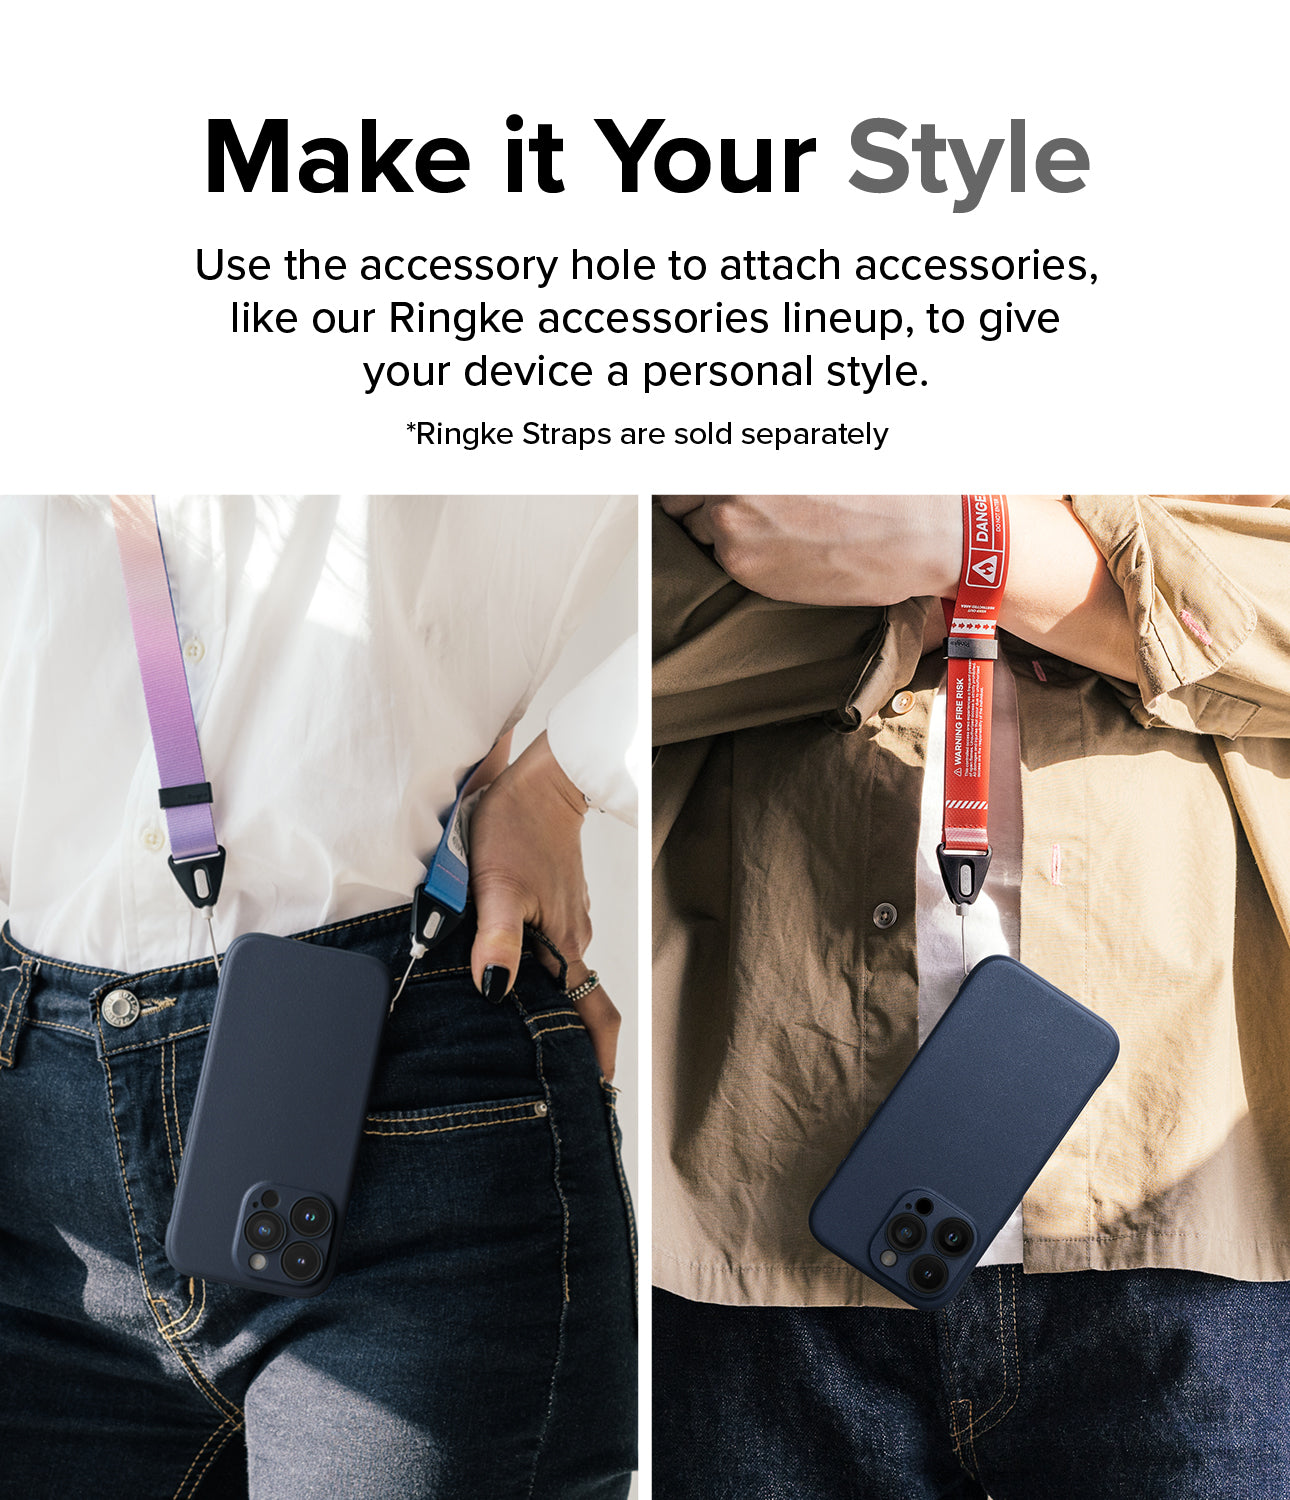 iPhone 15 Pro Case | Onyx - Navy - Make it Your Style. Use the accessory hole to attach accessories, like our Ringke accessories, to give your device a personal style.